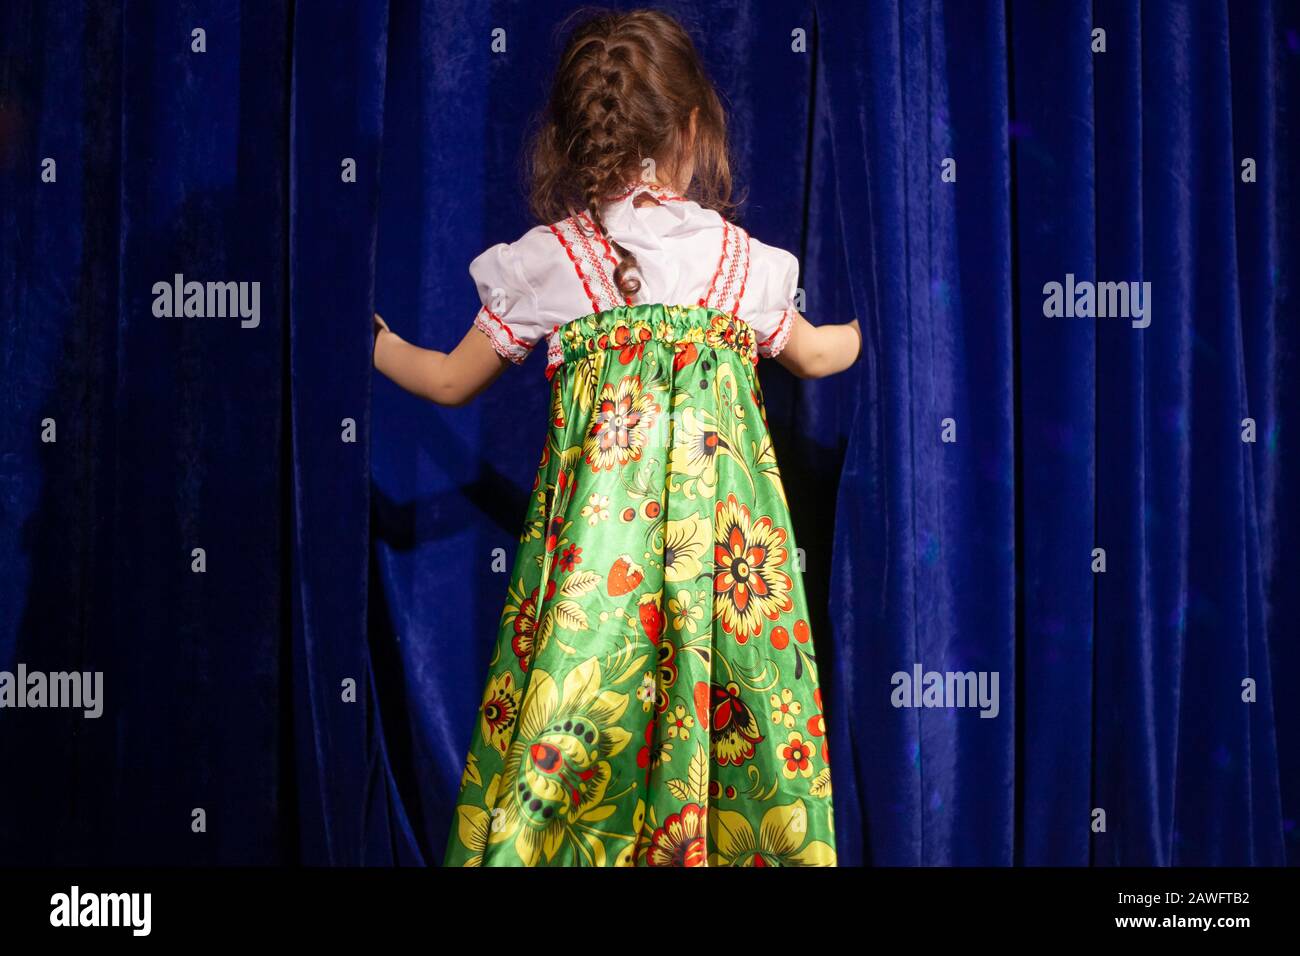 The child is waiting for a performance on stage. A girl peeks behind the curtain. Theatrical stage with a blue velvet curtain. Costume embroidered in Stock Photo